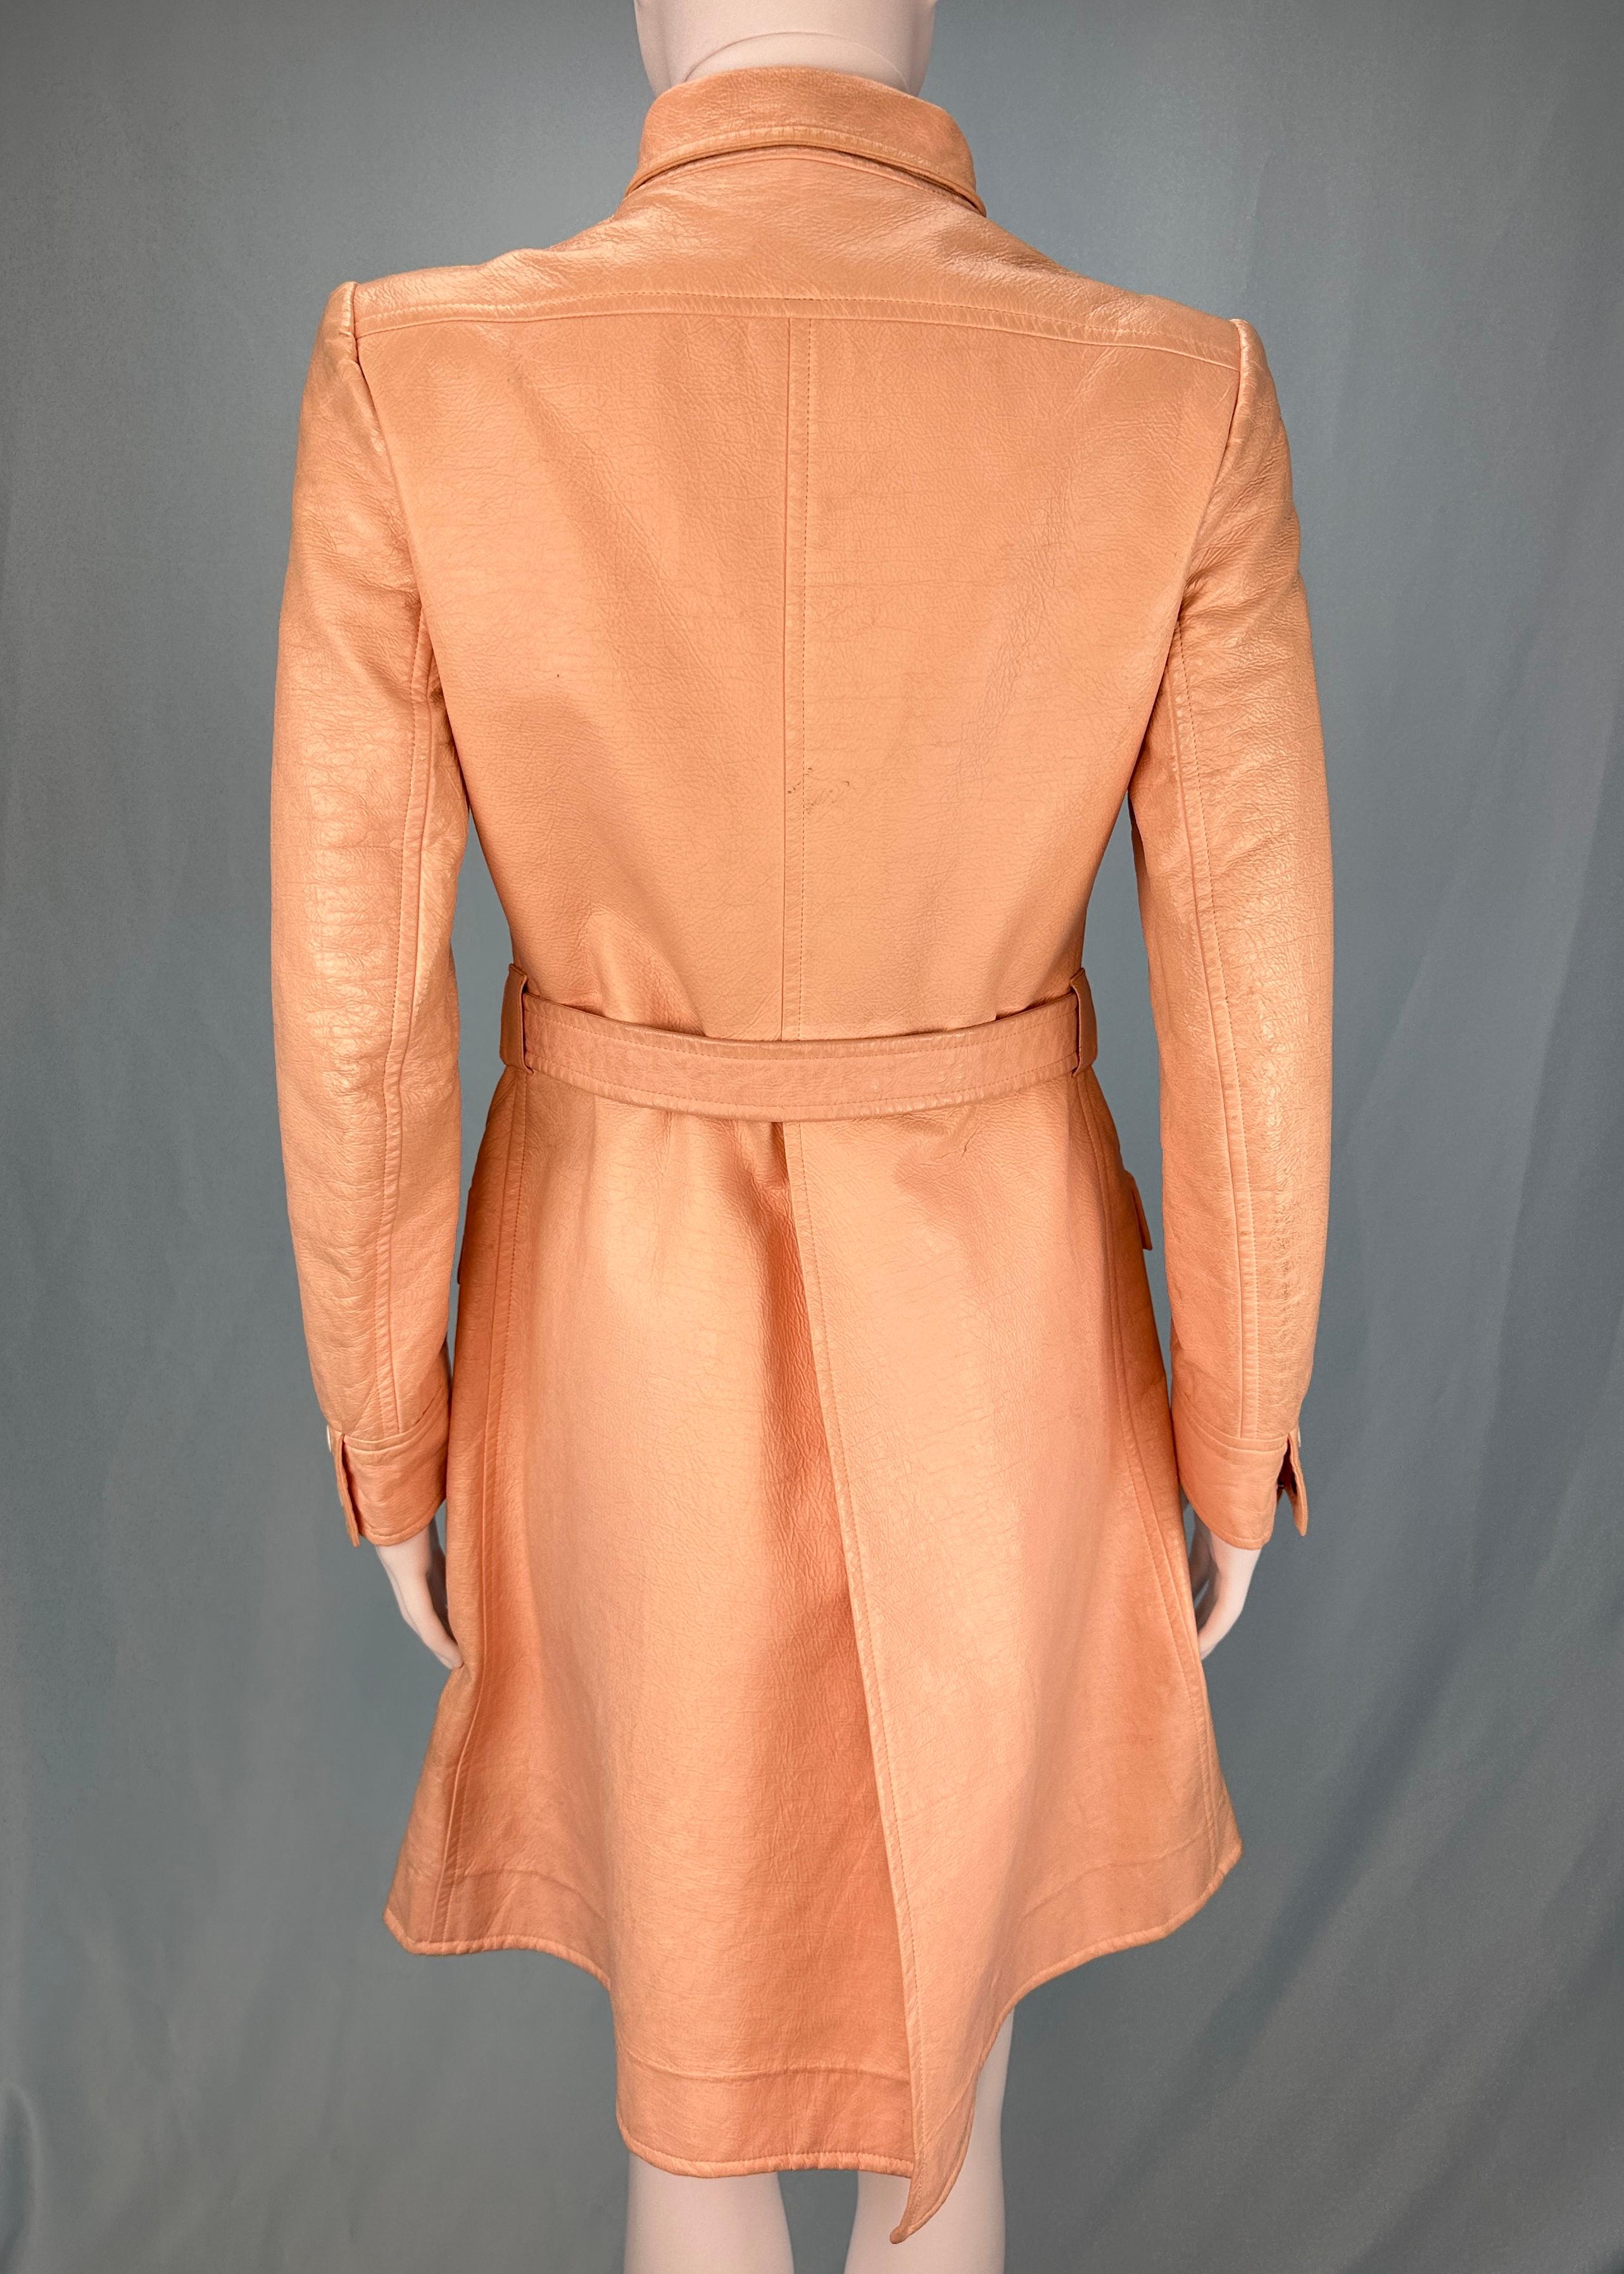 Courrèges 1960’s Nylon Pink Peach Trench Jacket For Sale 1